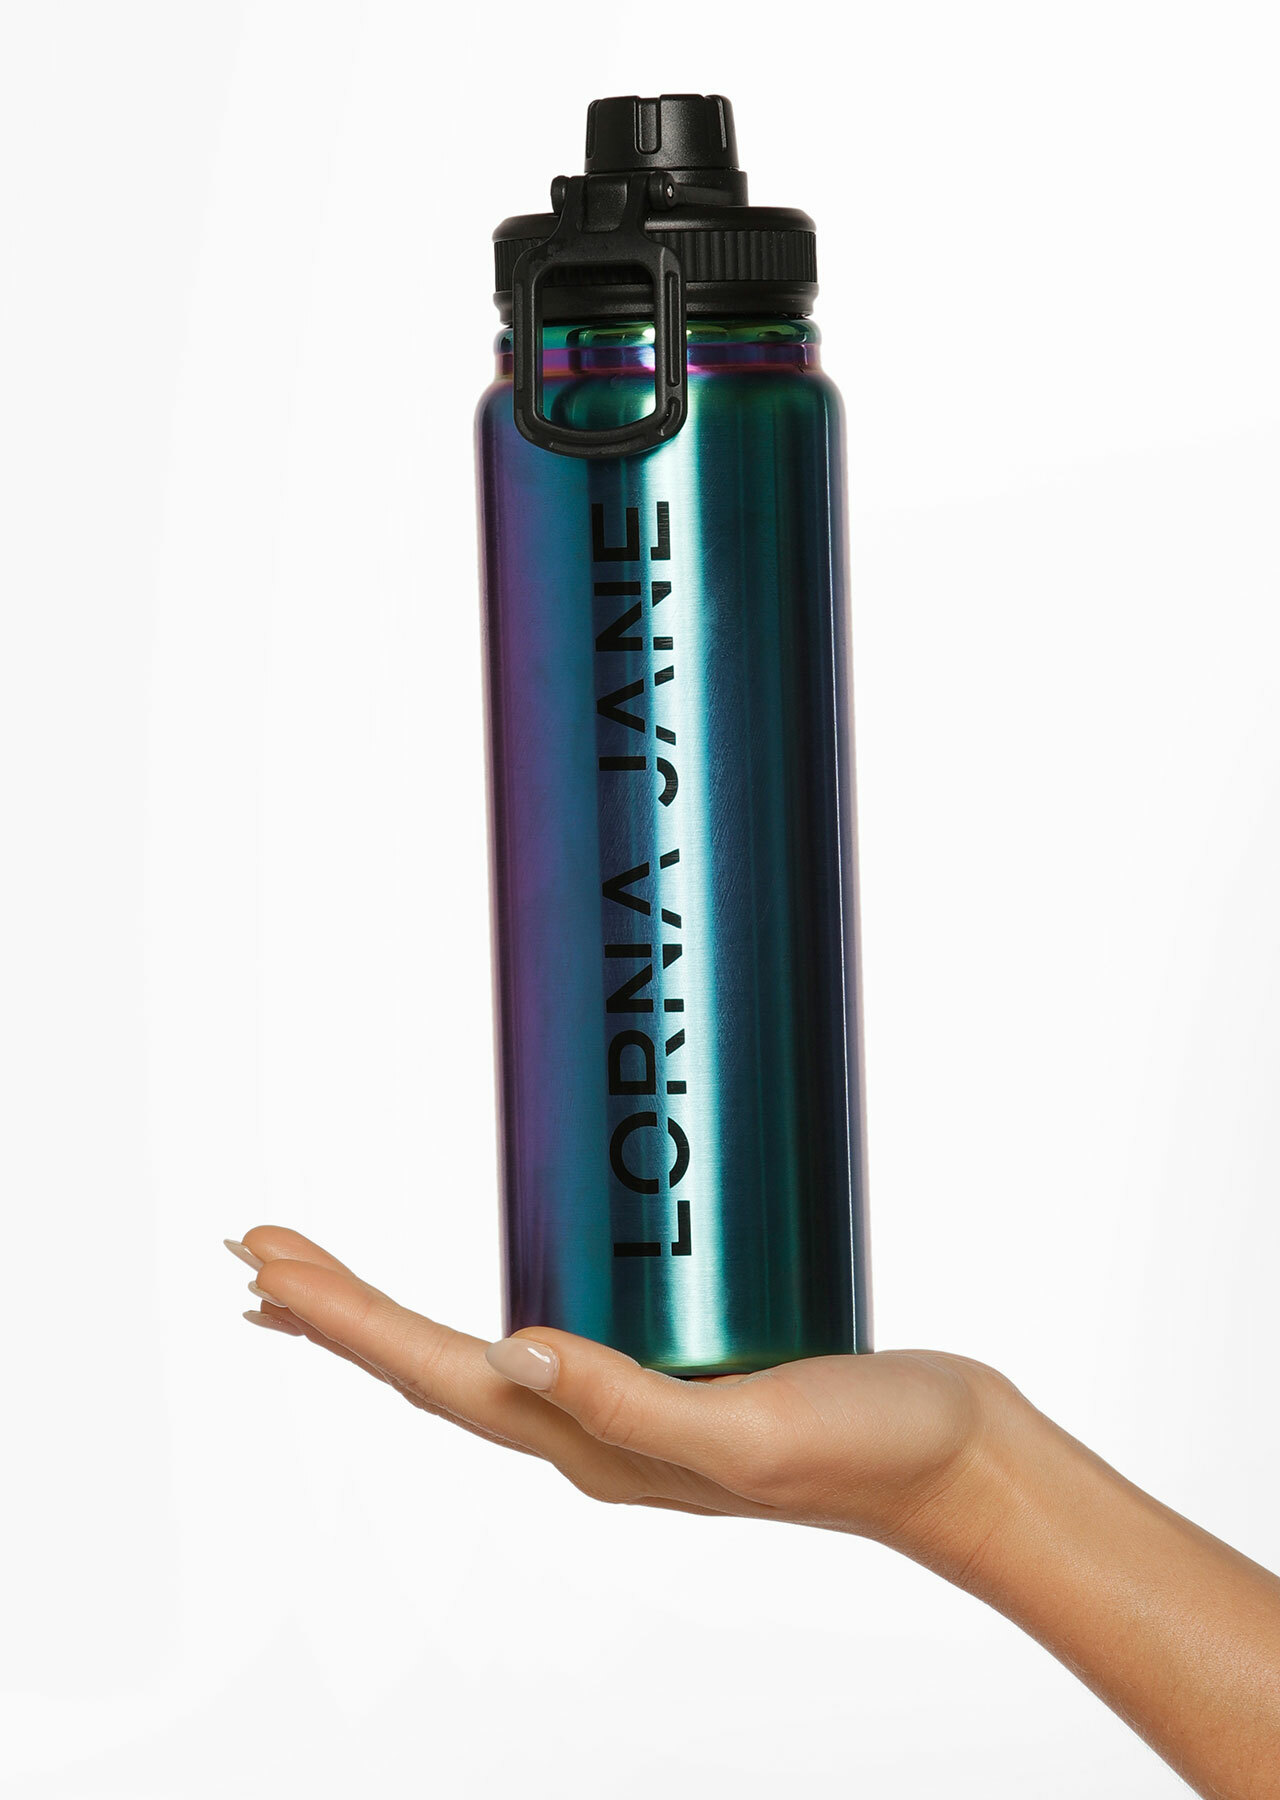 Rapunzel' Insulated Stainless Steel Water Bottle